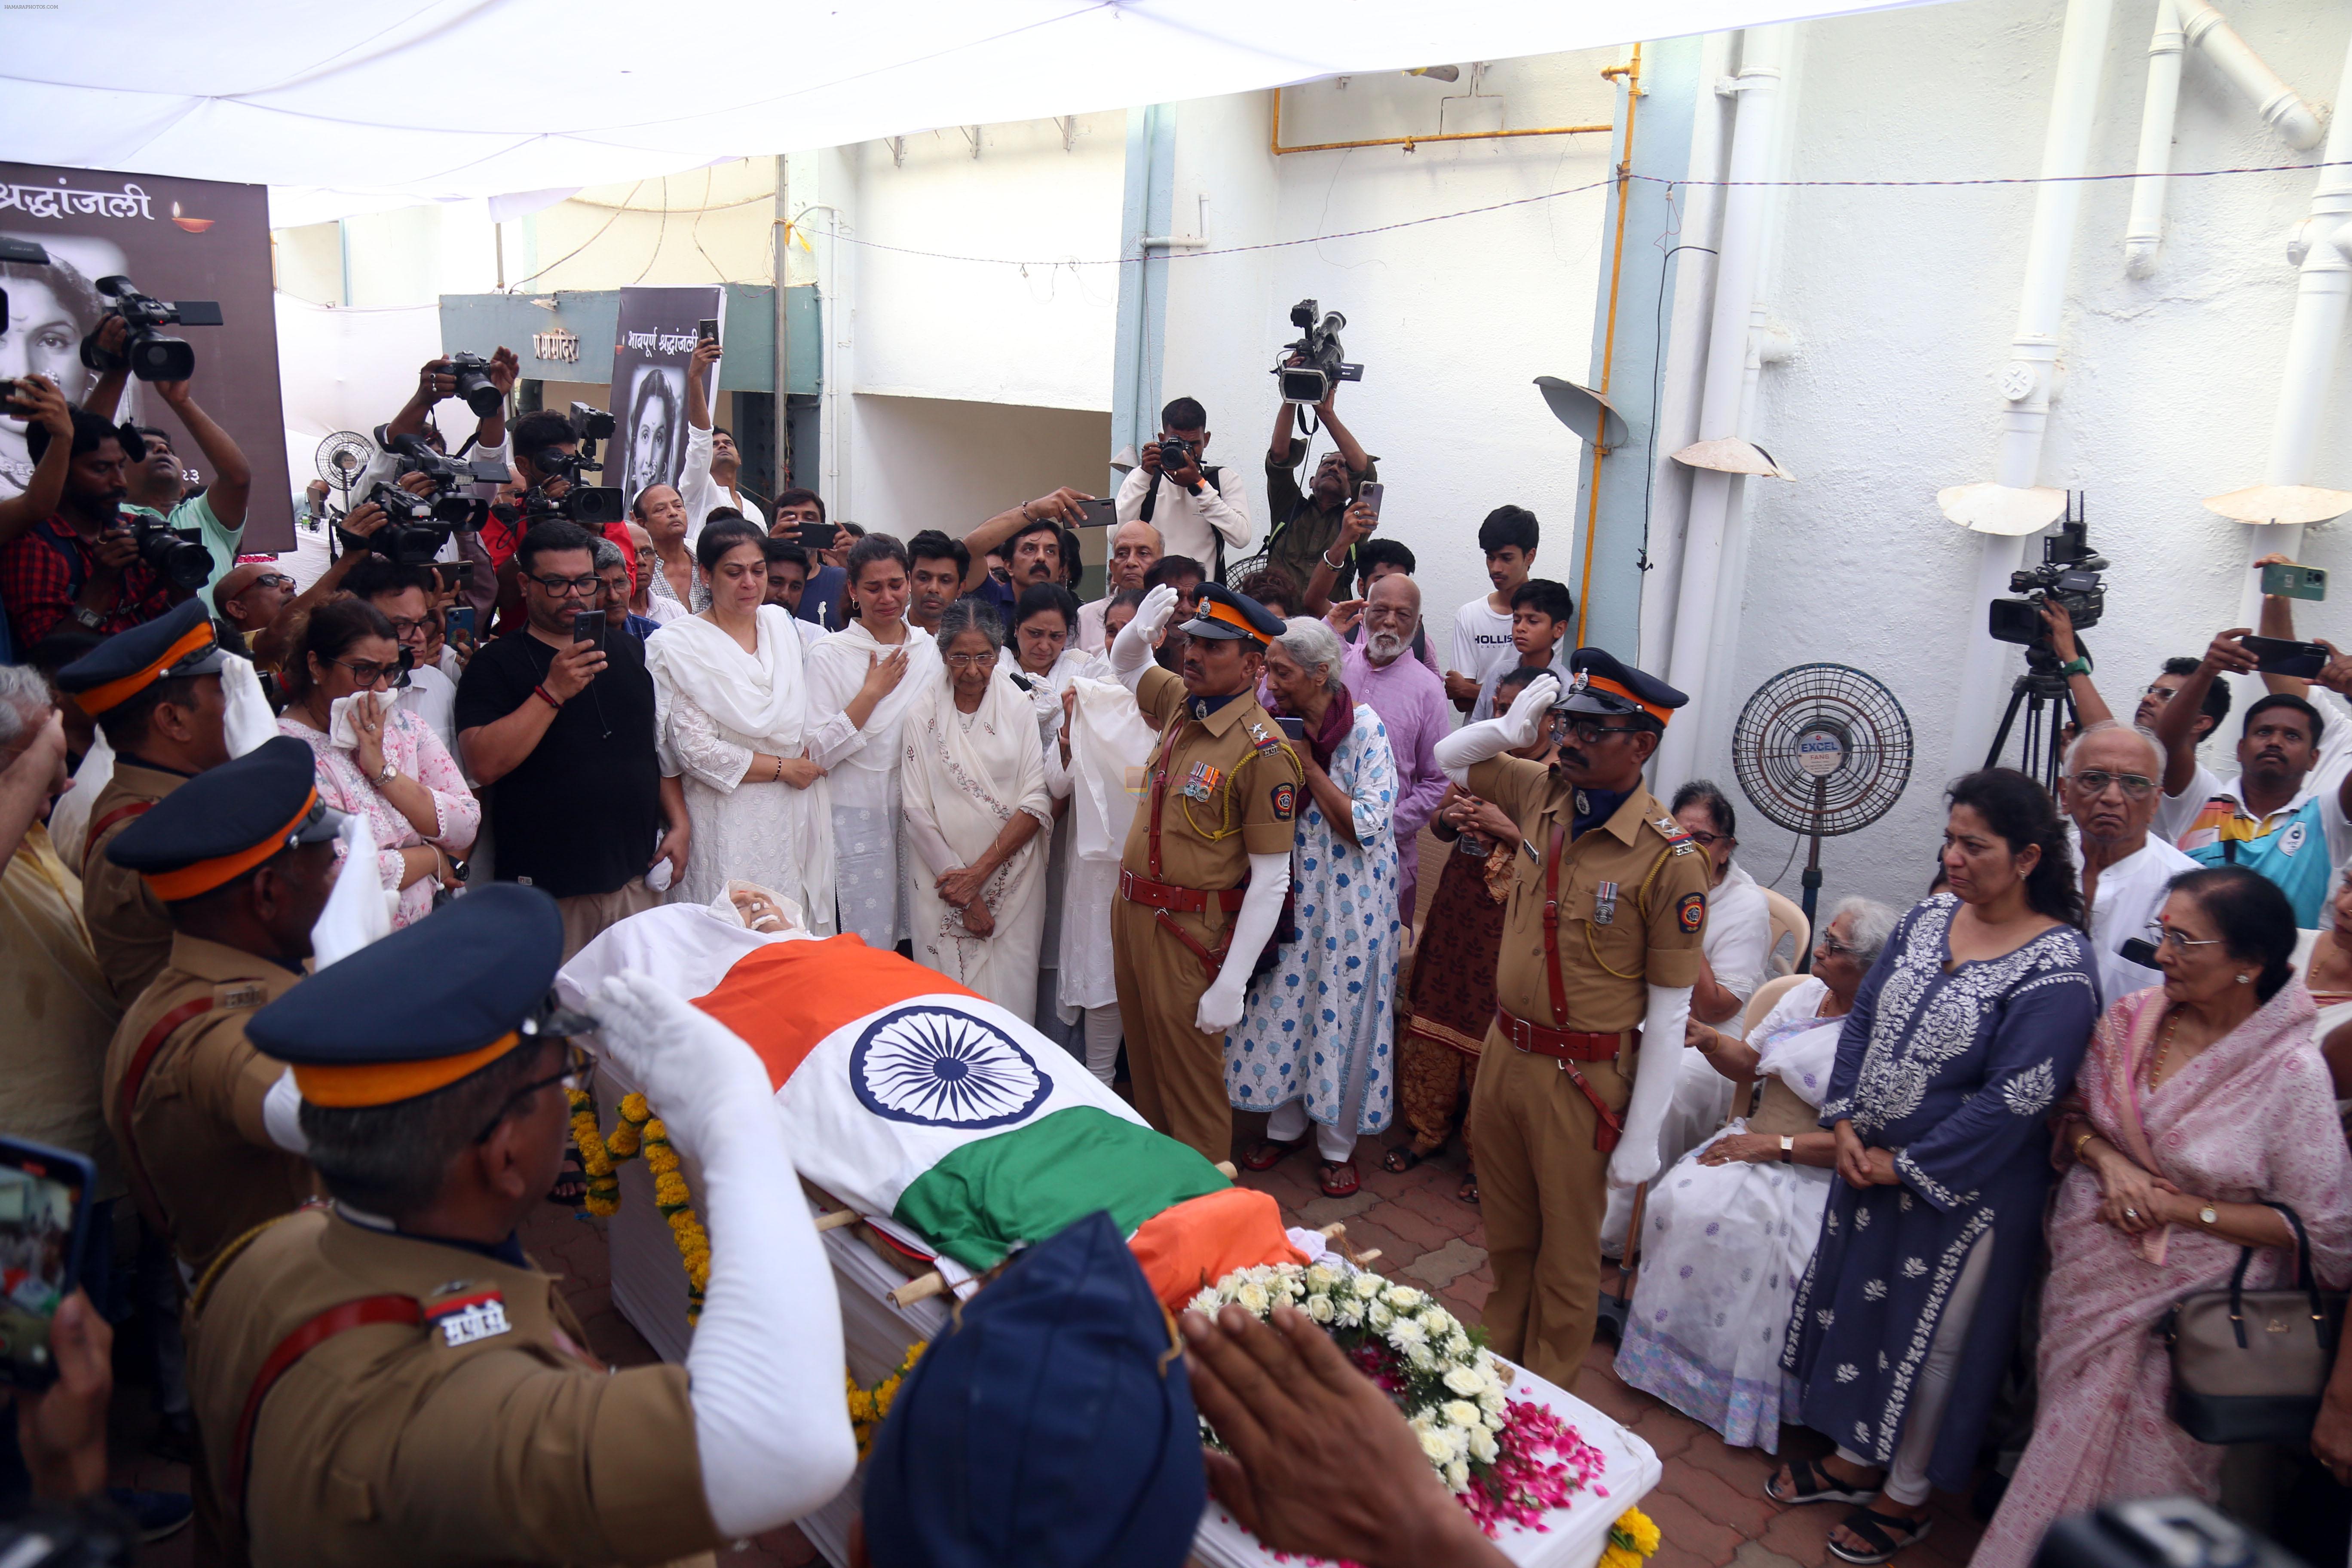 Guests gave final respects Sulochana Latkar at her house